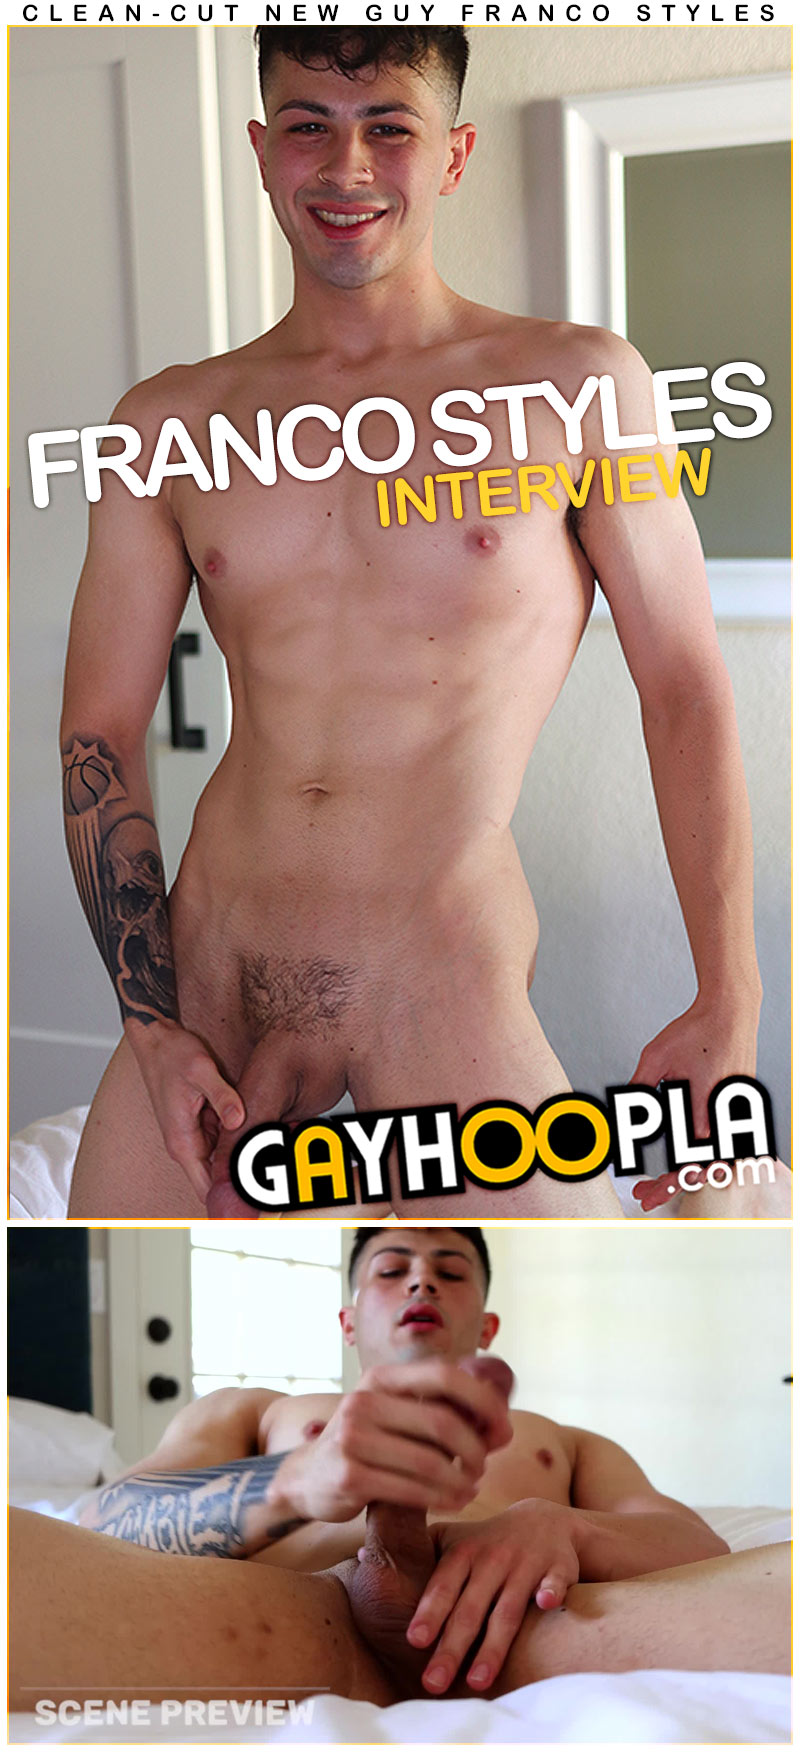 Clean-Cut New Guy Franco Styles Talks About Getting Into Porn at GayHoopla